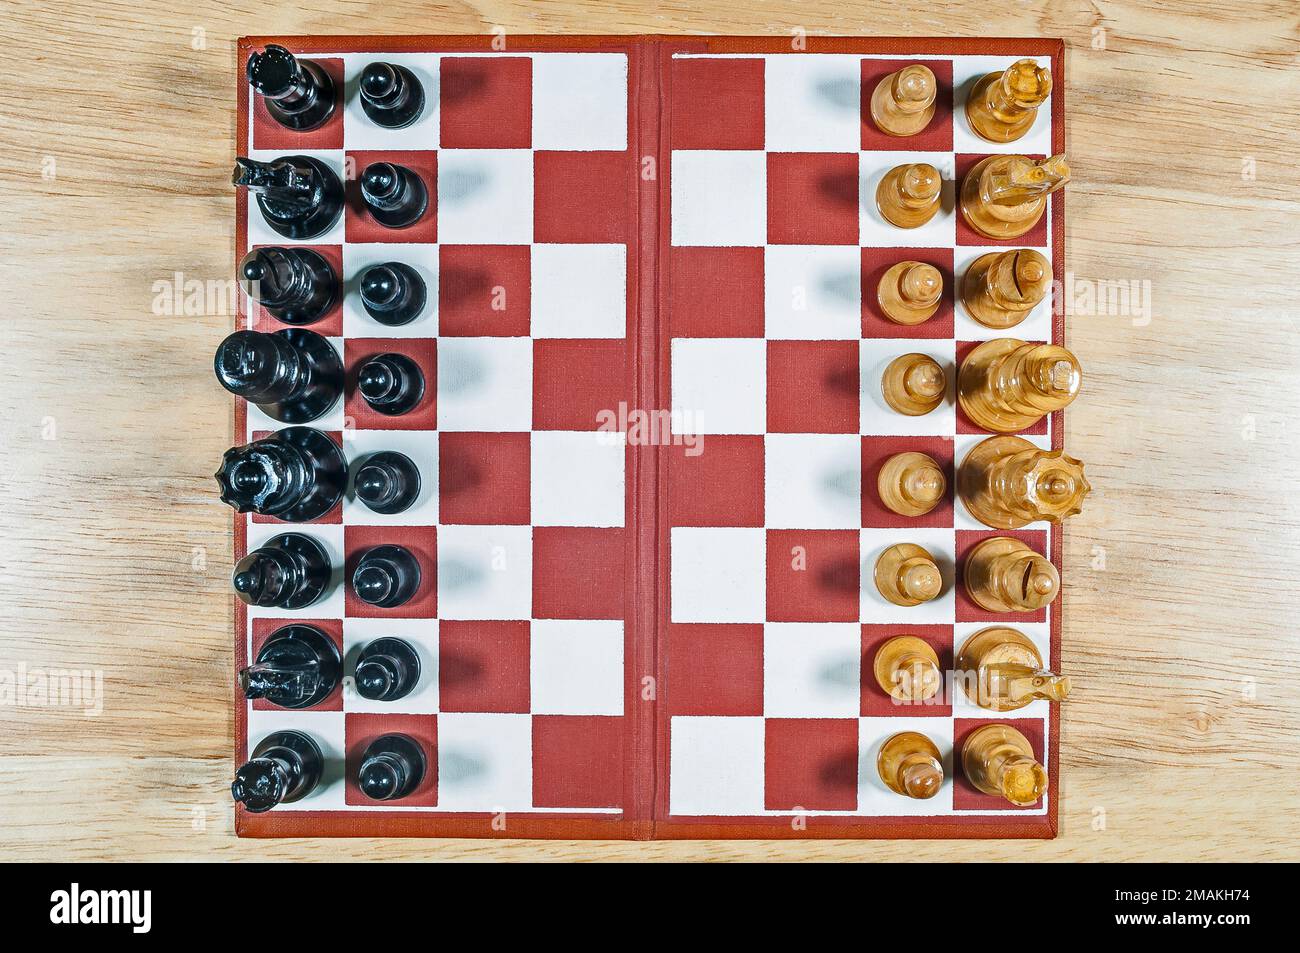 Overhead view of small wooden vintage chess set and board on a wood table.  Image may be rotated as desired for placement. Stock Photo